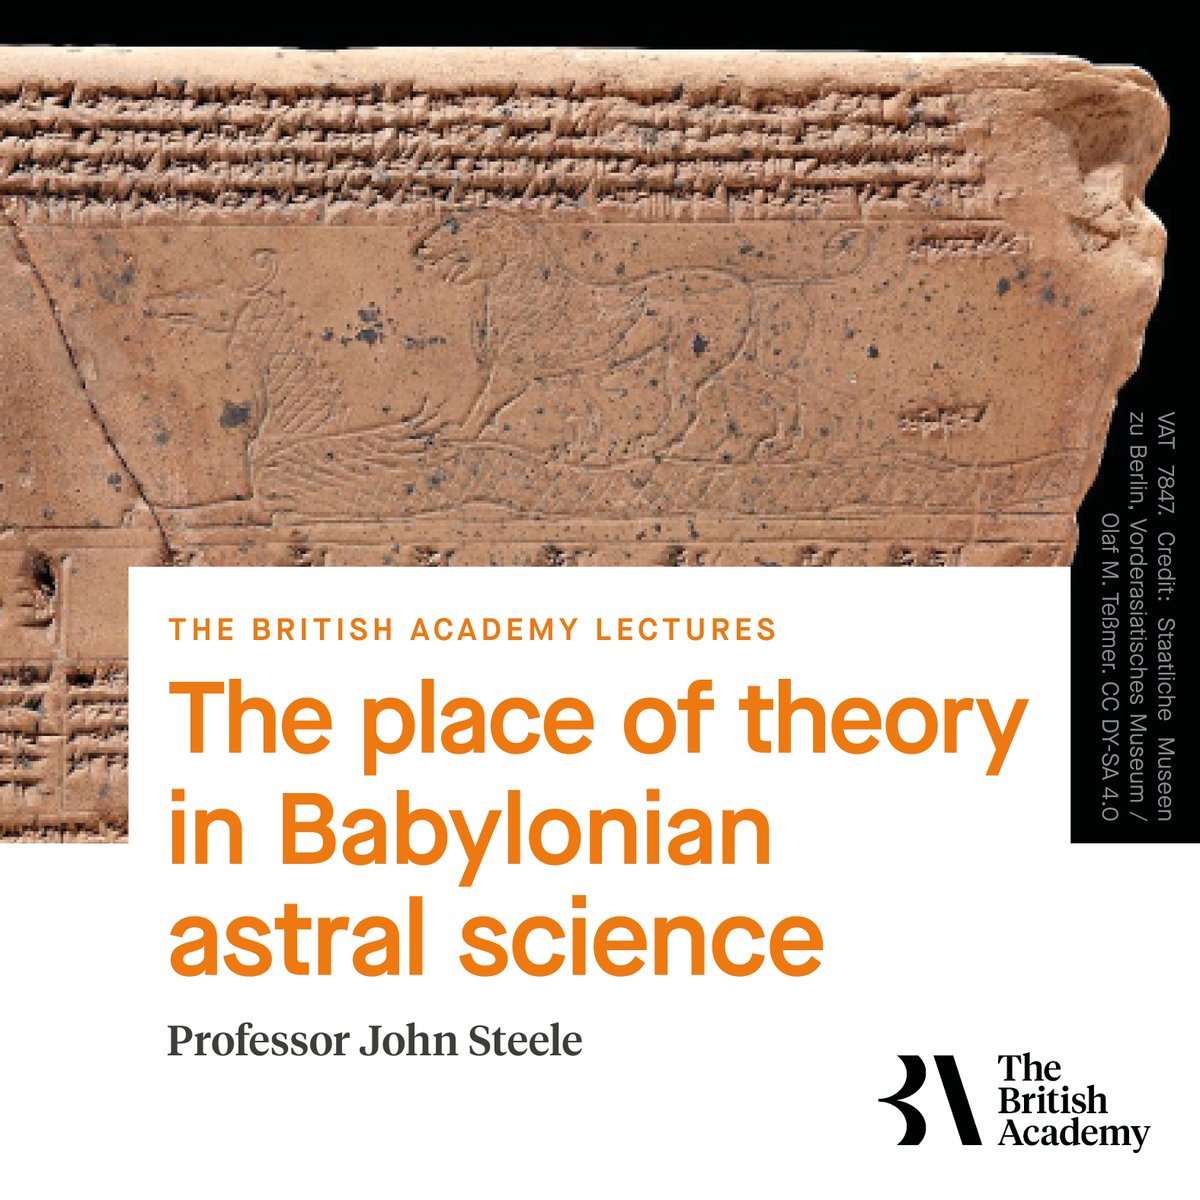 Event | Join us for ‘The place of theory in Babylonian astral science’, presented by Professor John Steele as part of the British Academy’s flagship lecture programme. 📅Thu 9 May, 5.30-6.30pm 📍Bennett Building 🎫buytickets.at/uolevents/1095… #CitizensOfChange | @BritishAcademy_